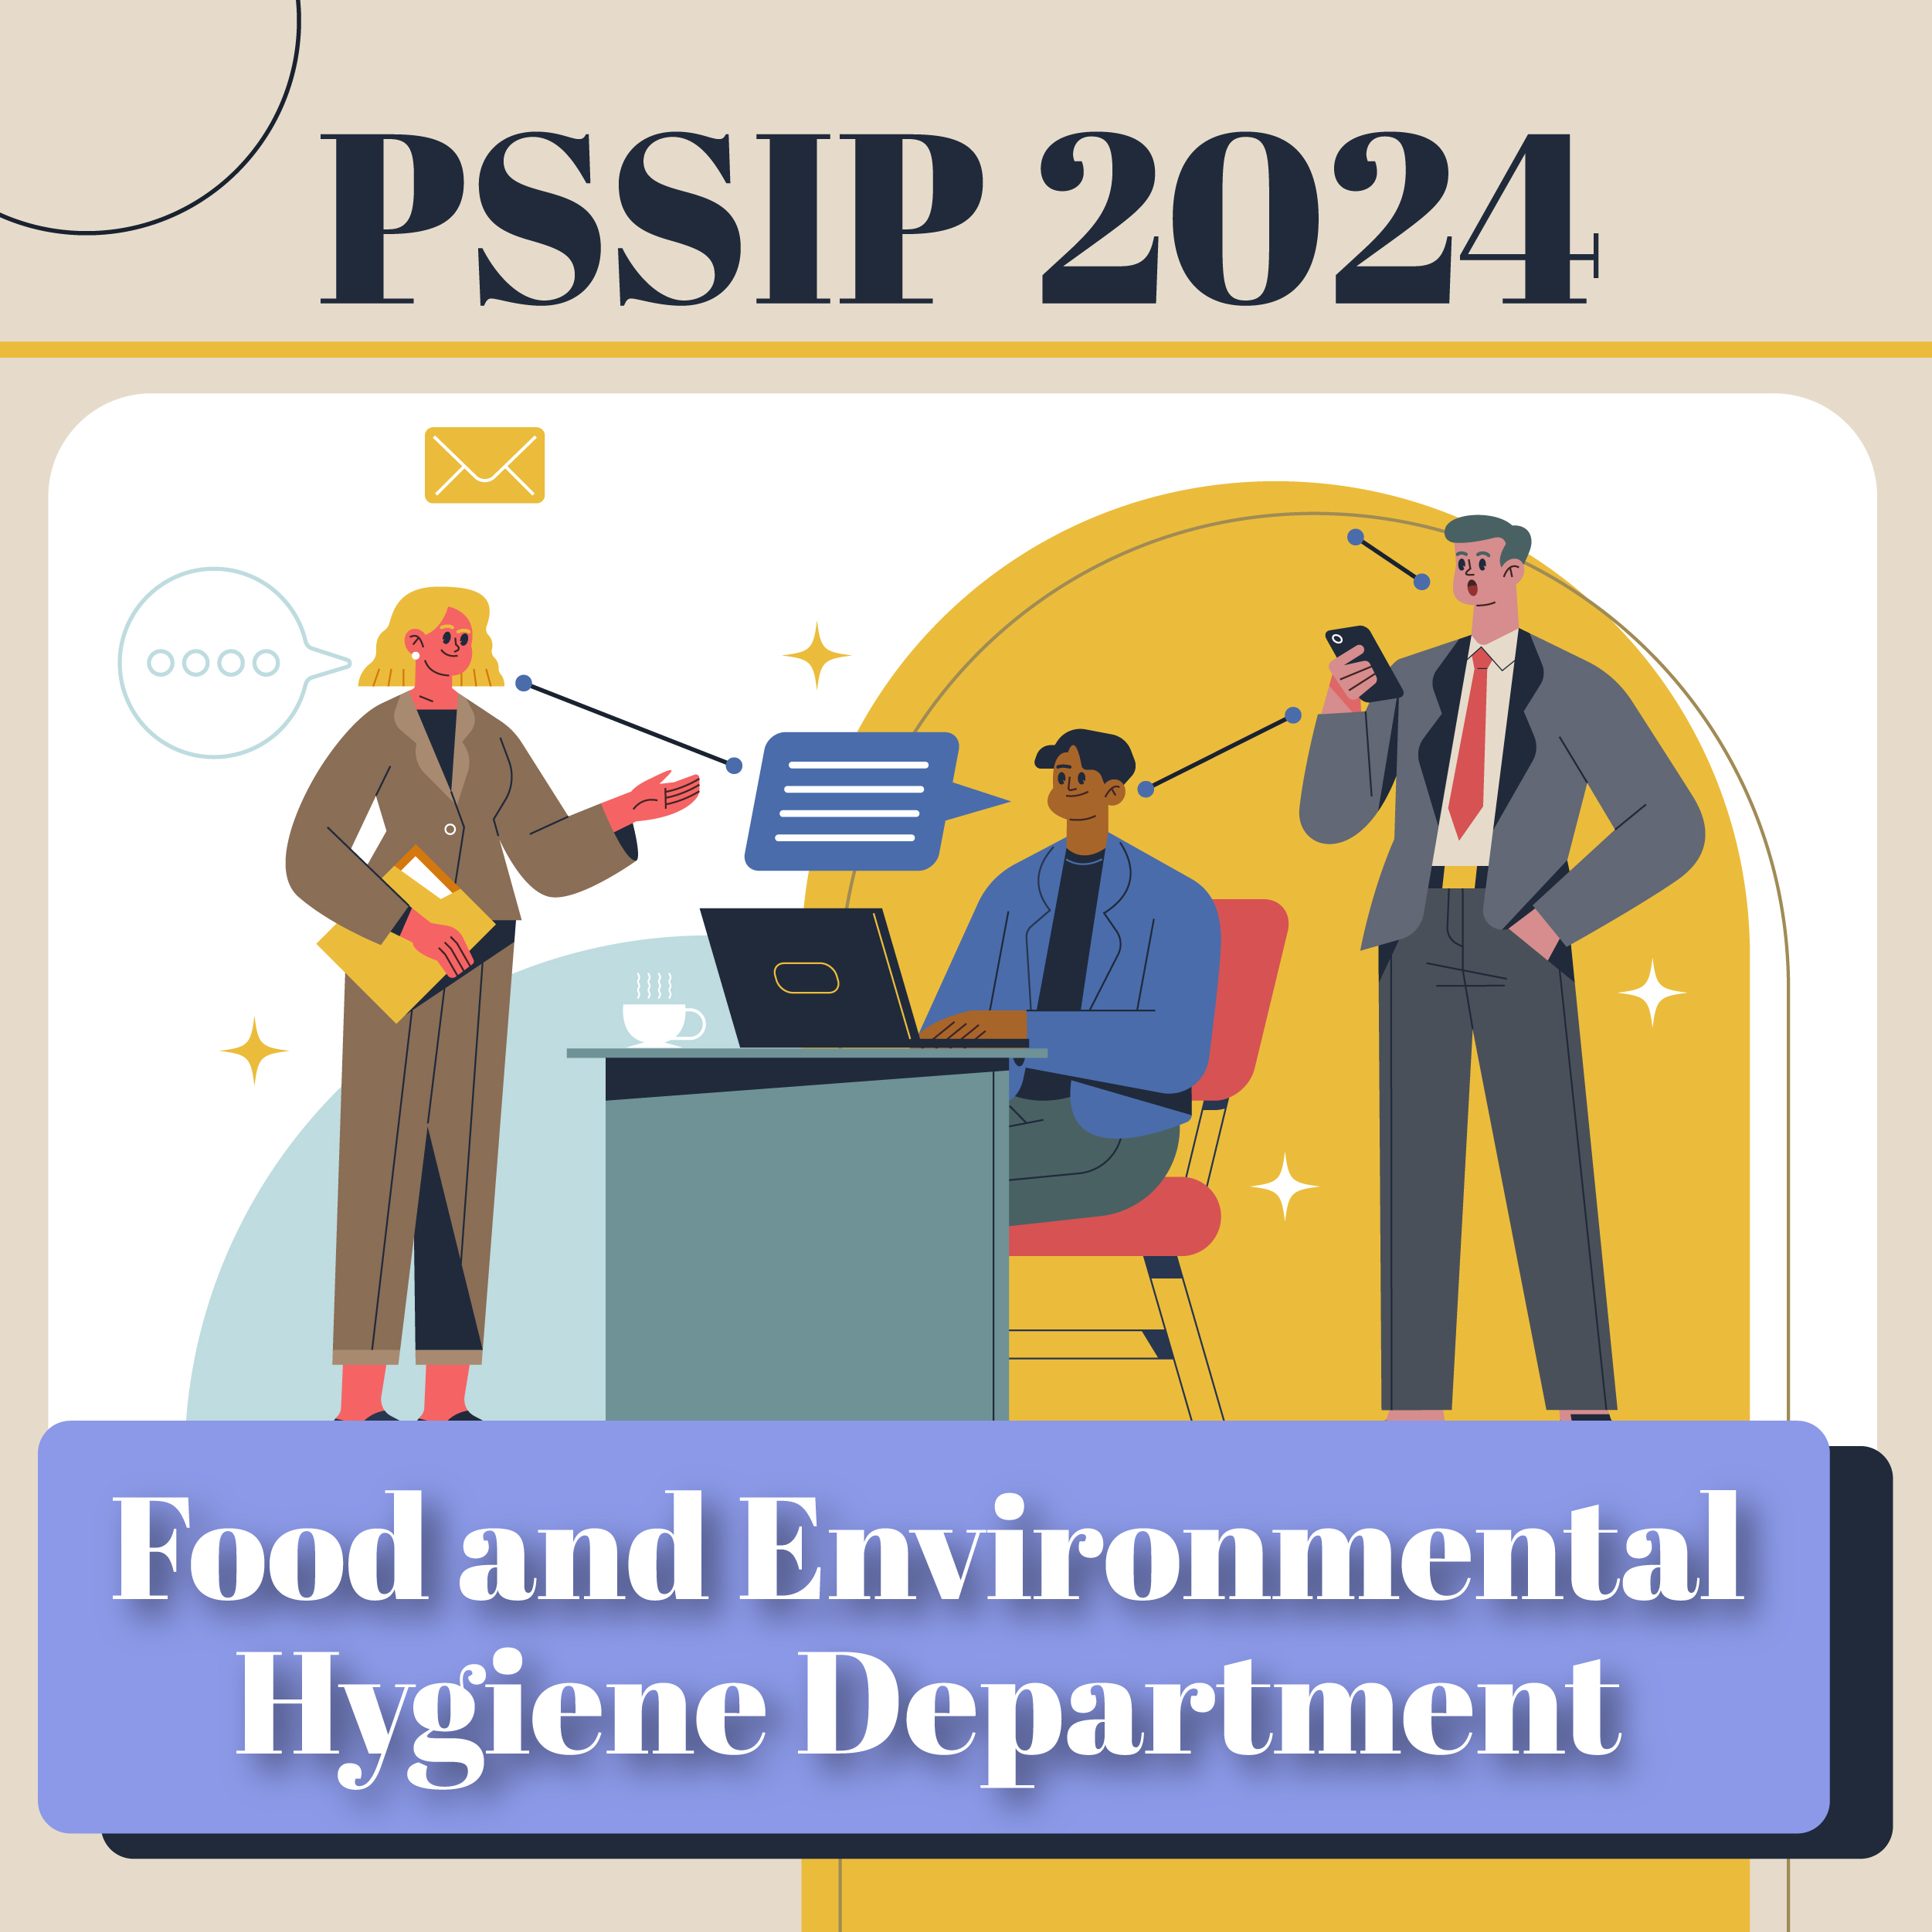 PSSIP2024 – Training Section, FEHD